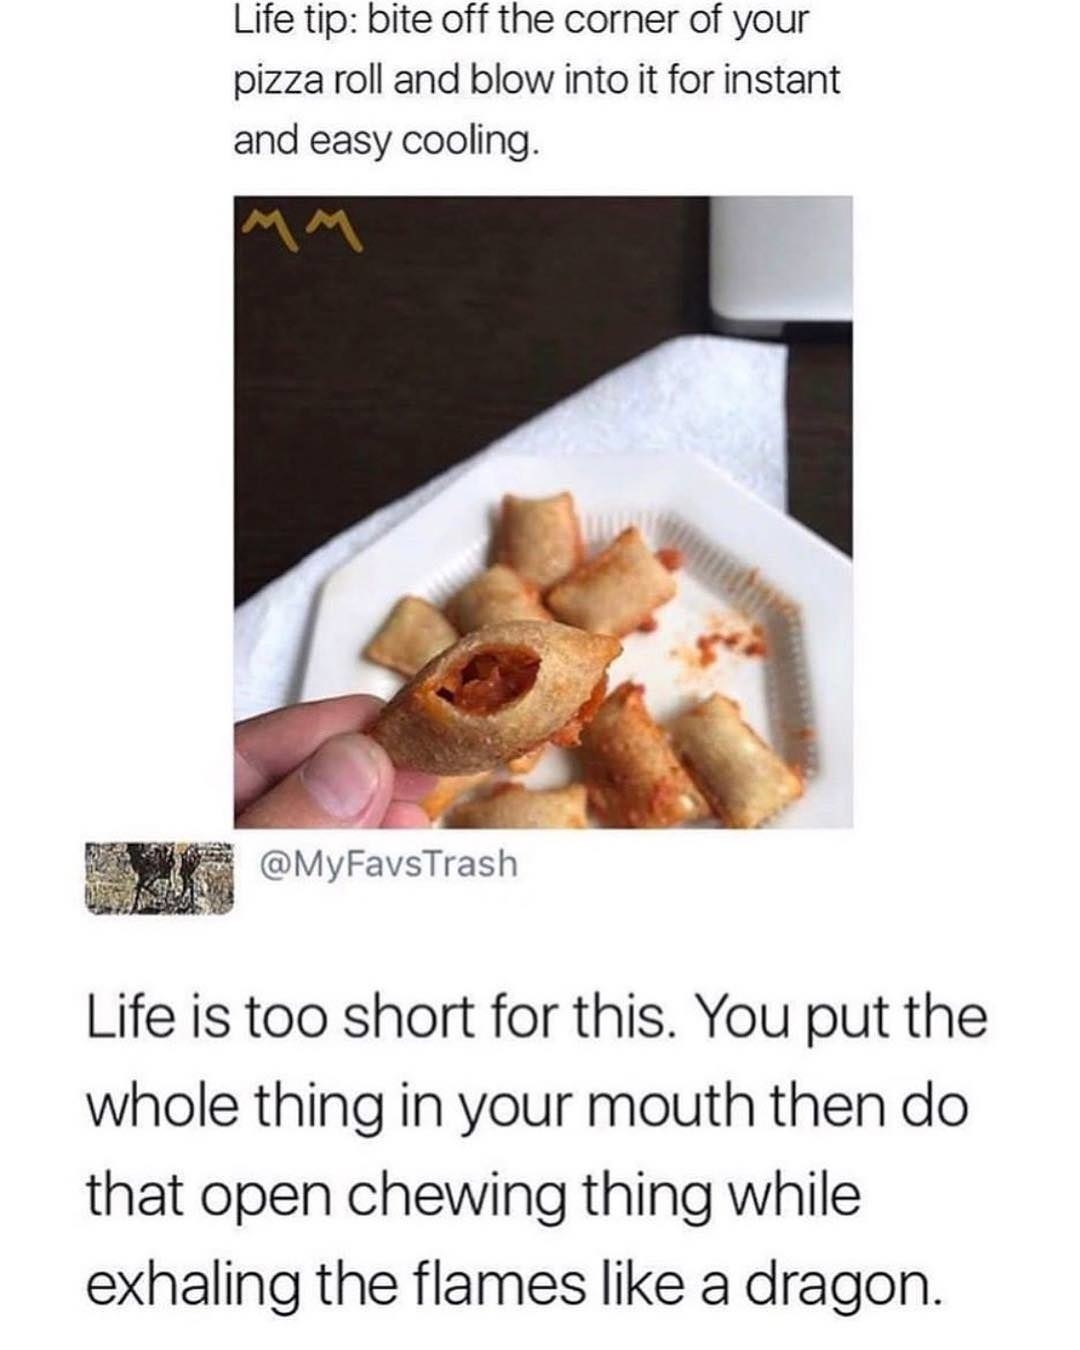 pizza bites meme - Life tip bite off the corner of your pizza roll and blow into it for instant and easy cooling. Life is too short for this. You put the whole thing in your mouth then do that open chewing thing while exhaling the flames a dragon.